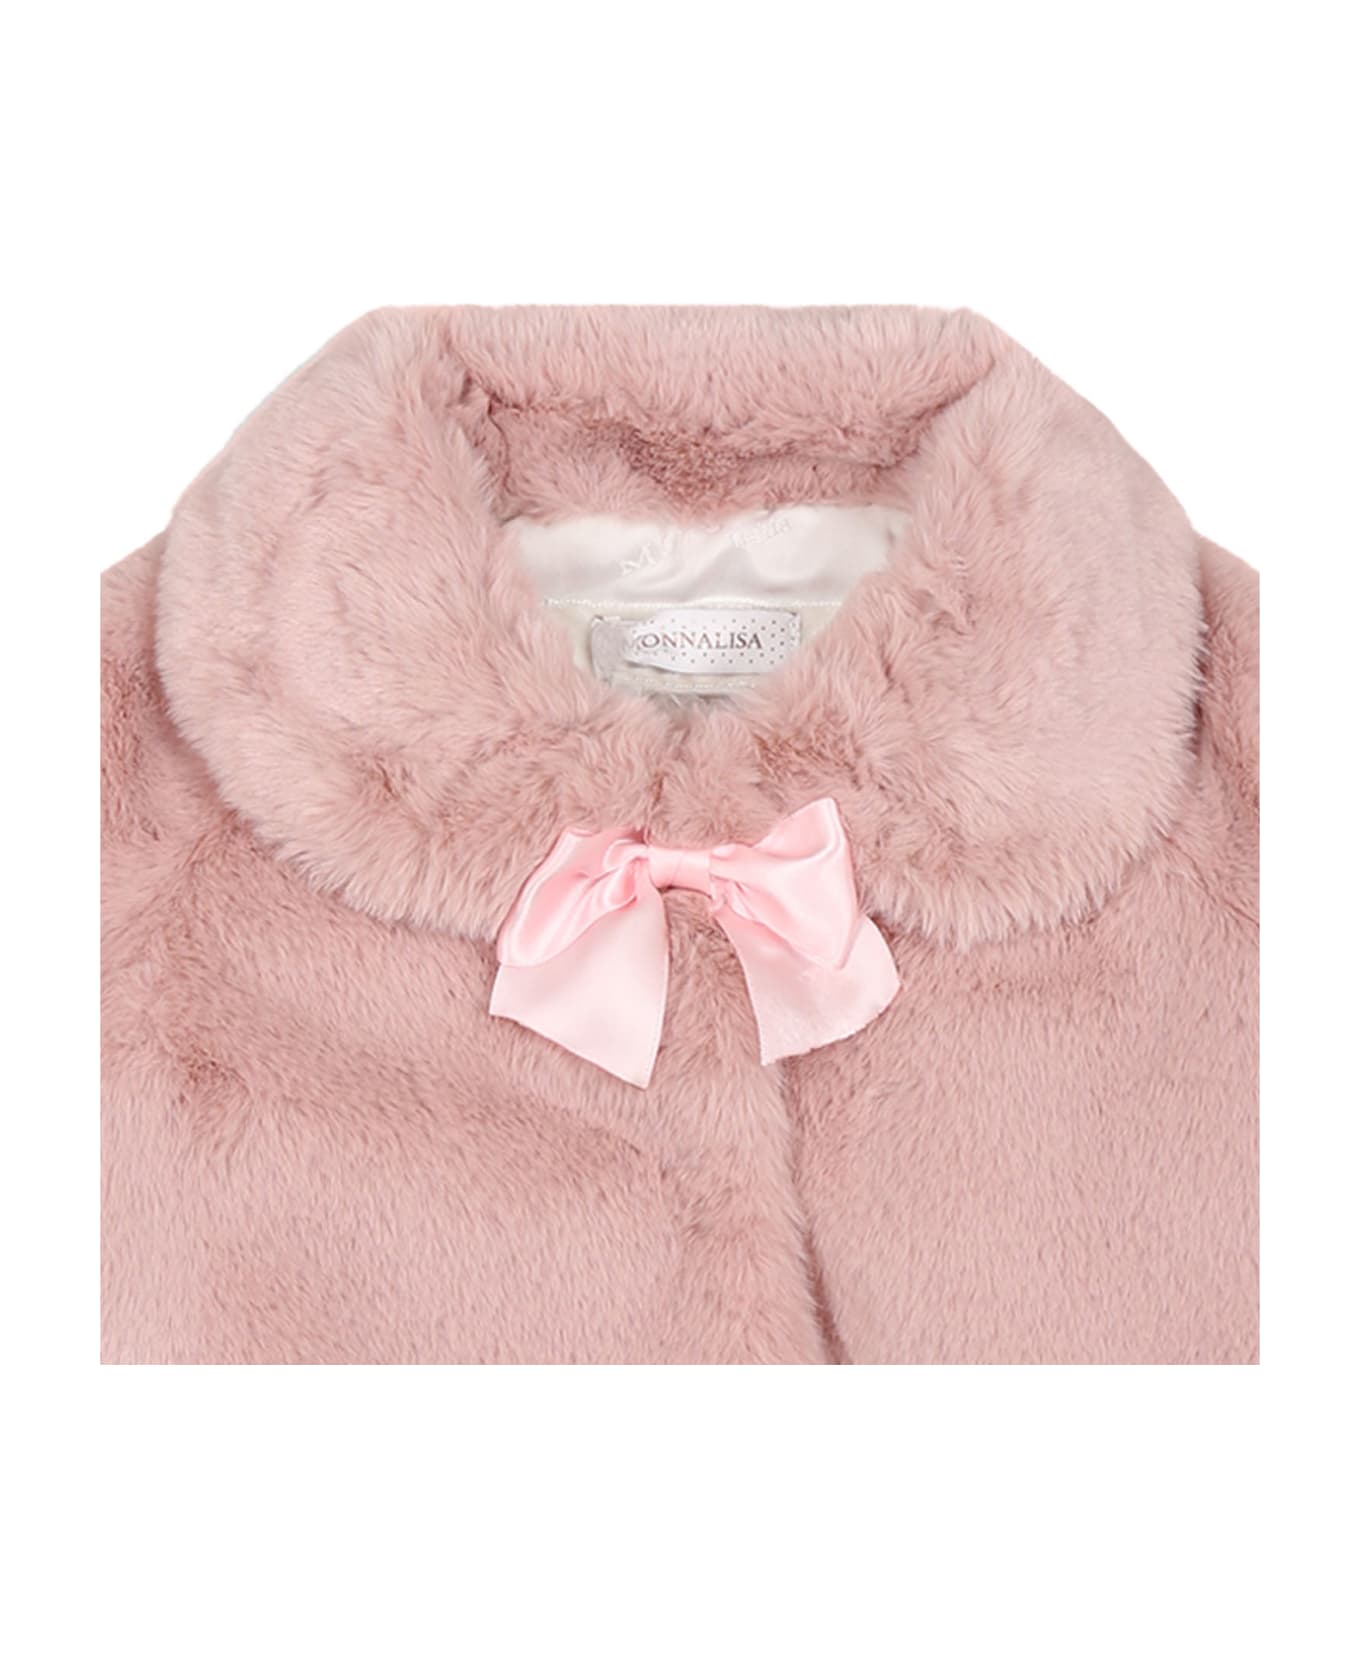 Monnalisa Pink Faux Fur For Baby Girl With Bow - Pink